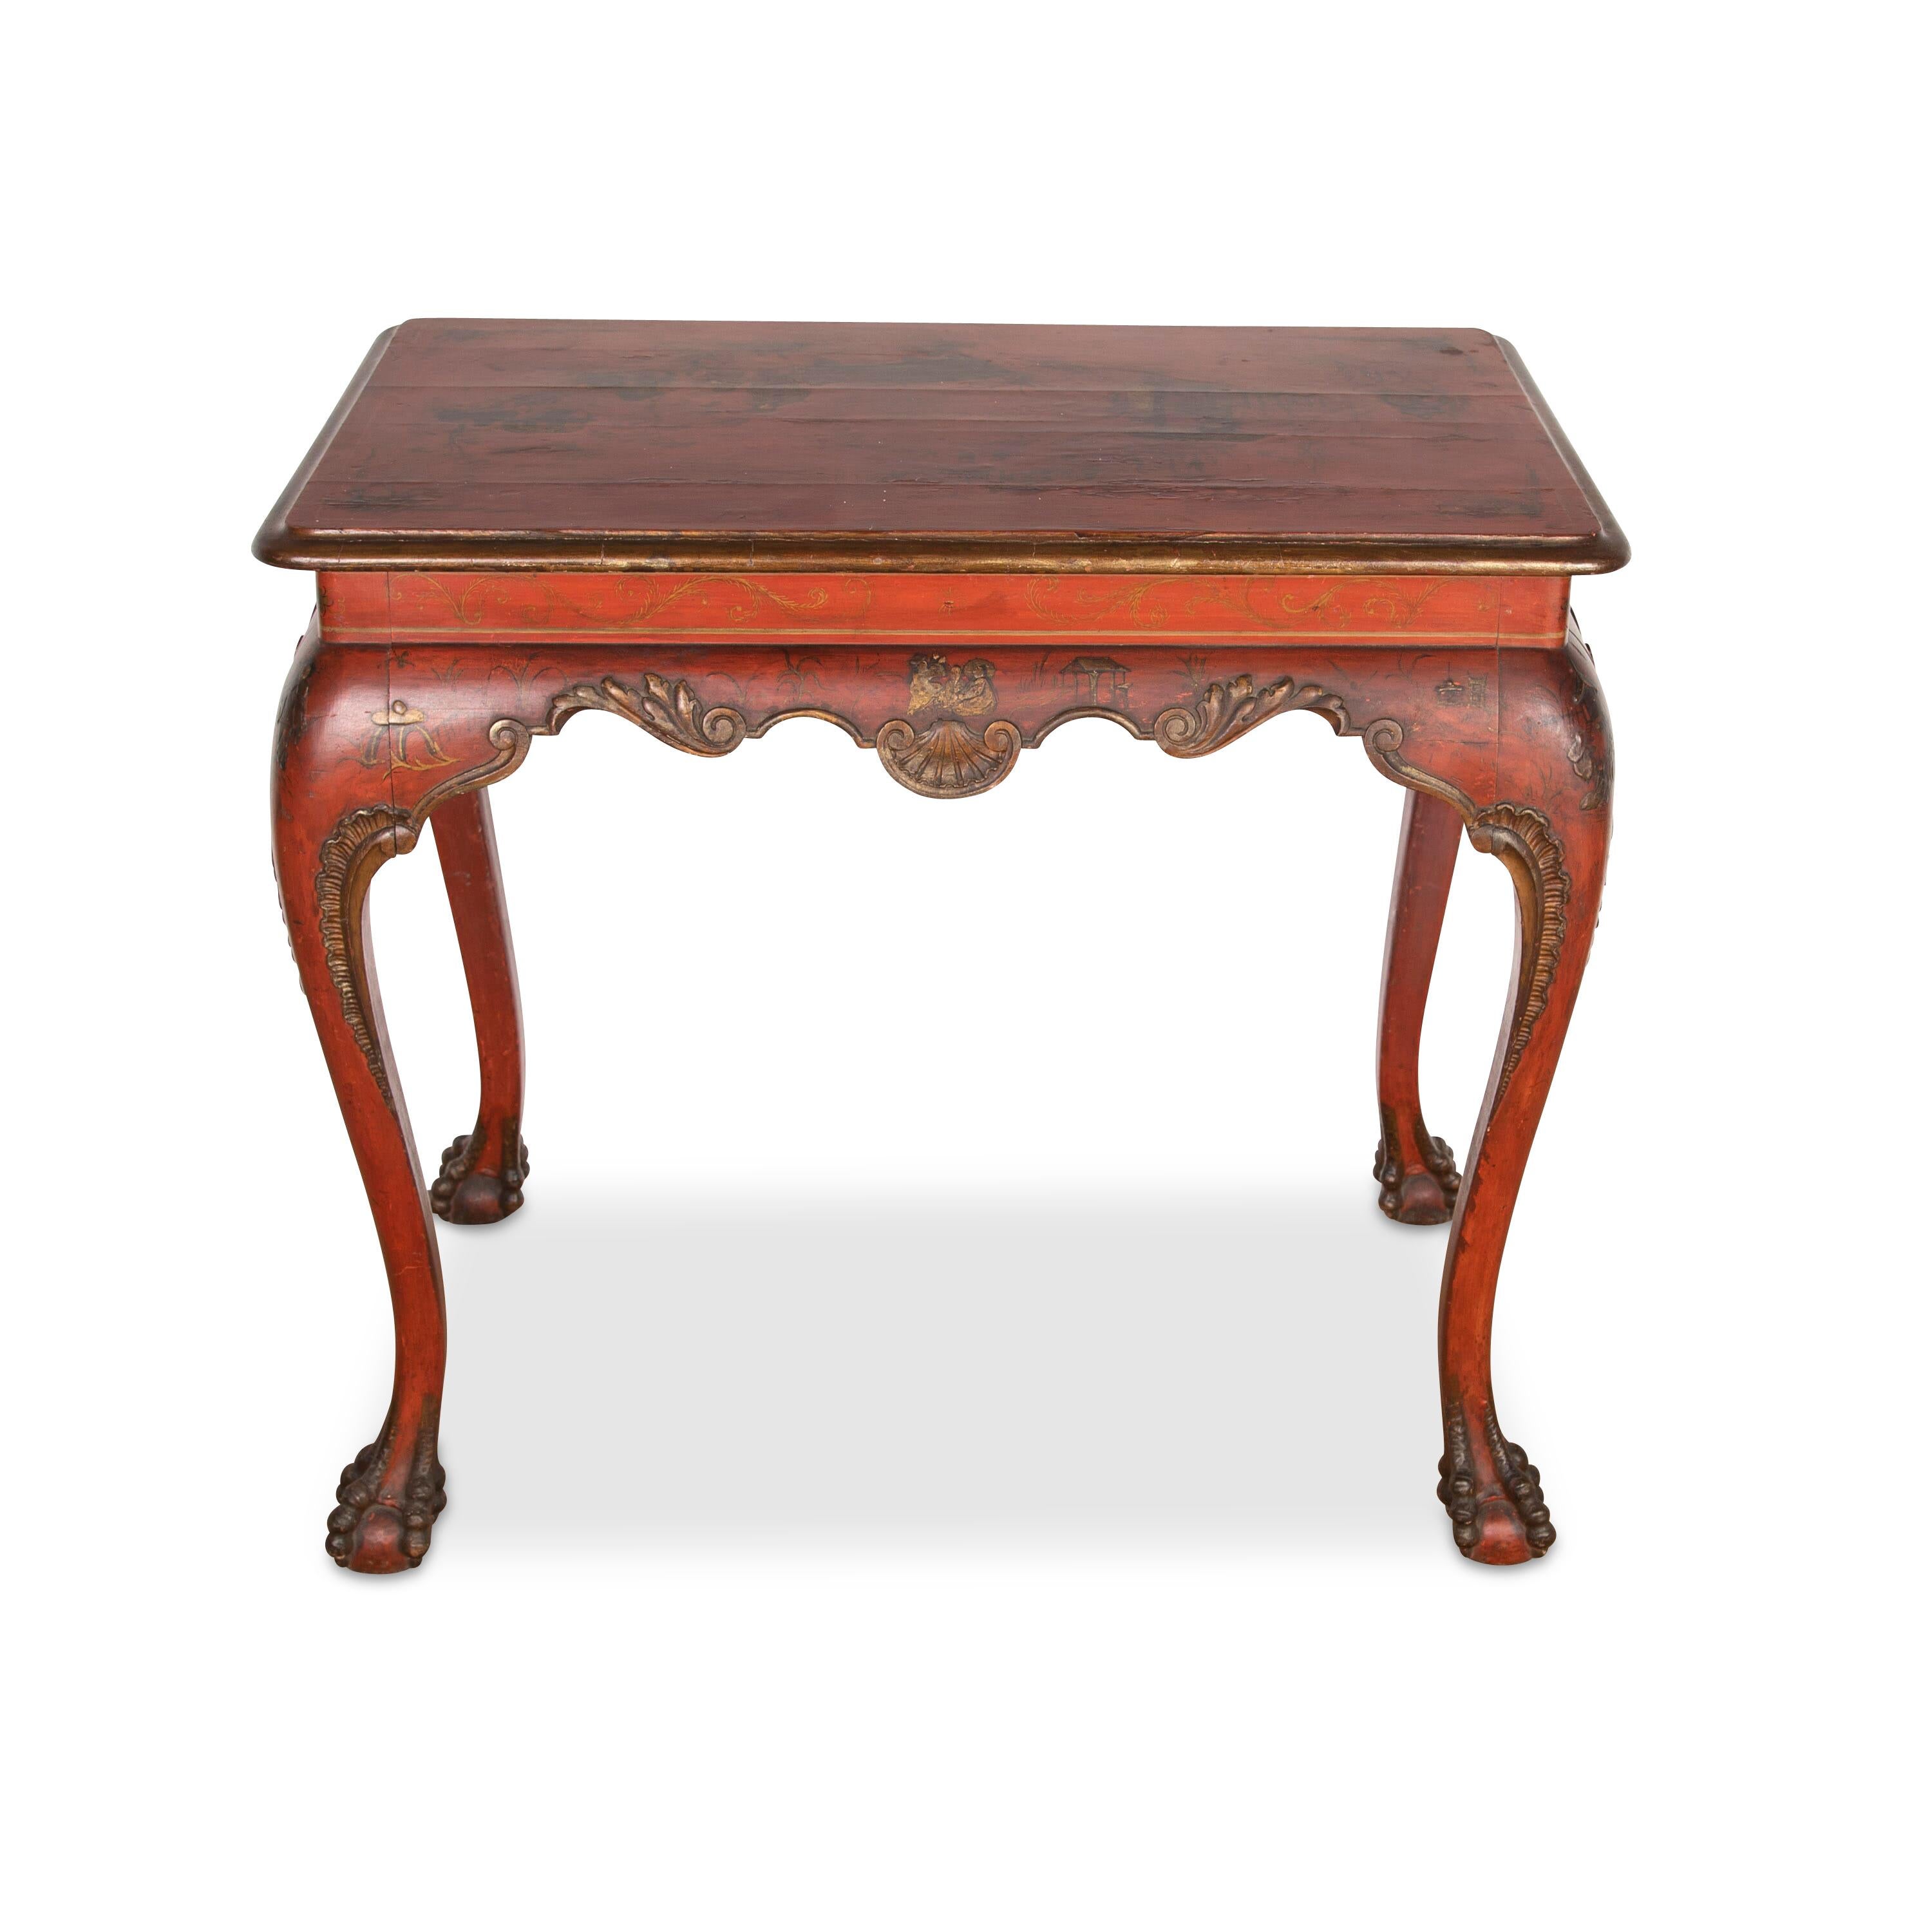 ﻿ A stylish early C19th Italian centre table, wonderfully decorated in red lacquer with gilt chinoiserie highlighted scene in the form of people, buildings and foliage. Raised on carved cabriole legs with shaped apron centred with shells and